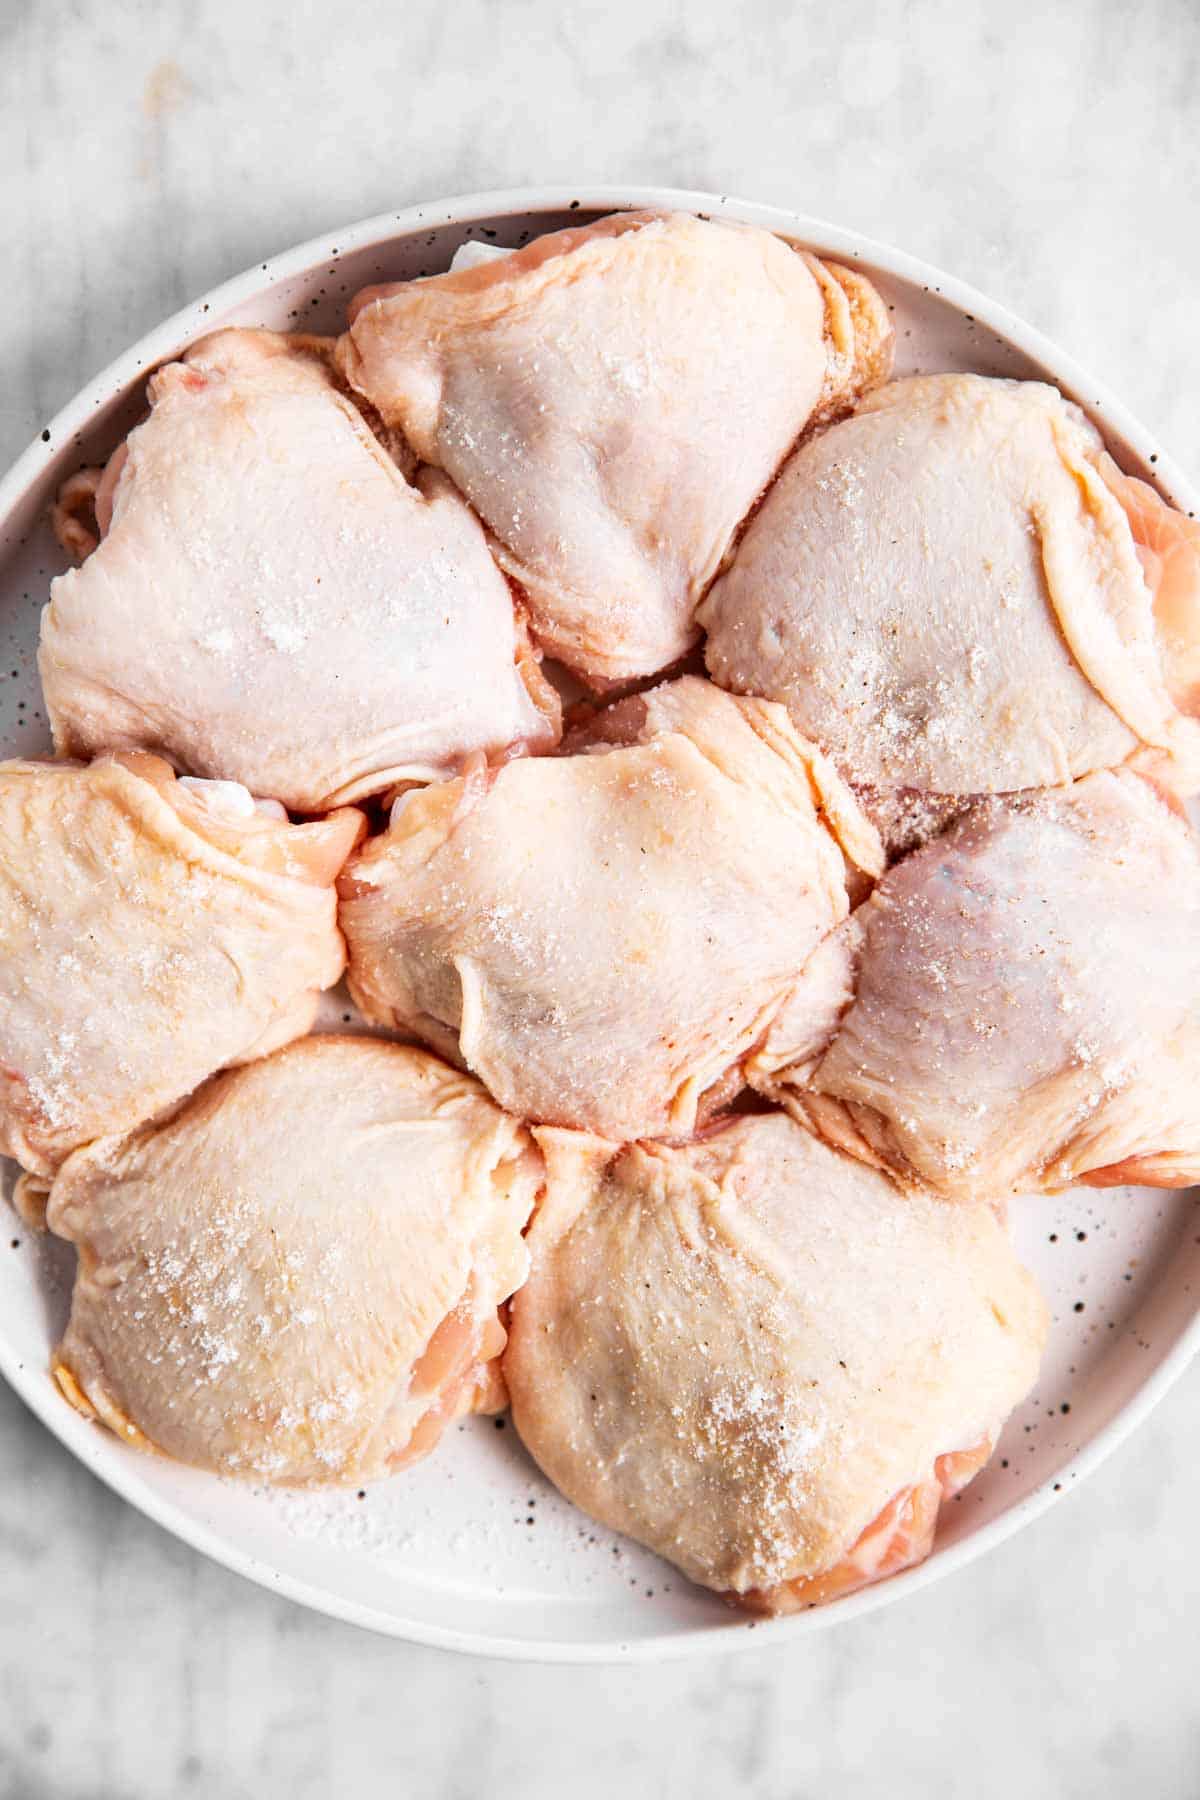 eight raw chicken thighs on white plate